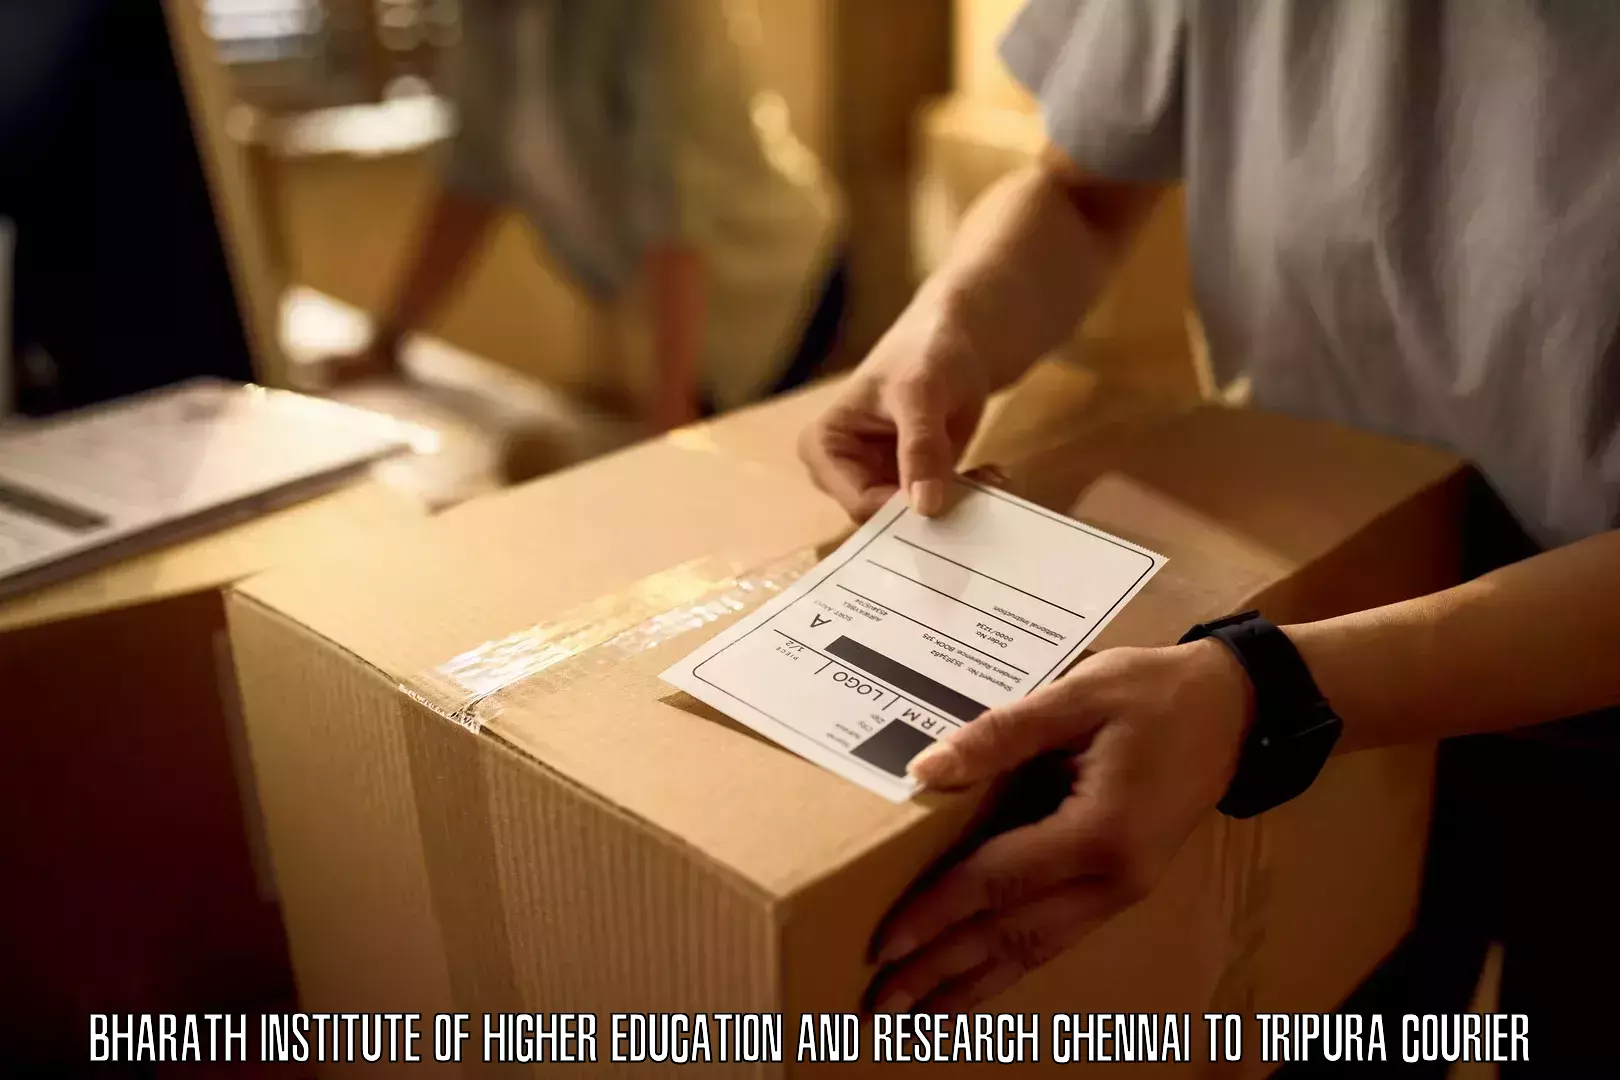 Custom courier packaging Bharath Institute of Higher Education and Research Chennai to Tripura